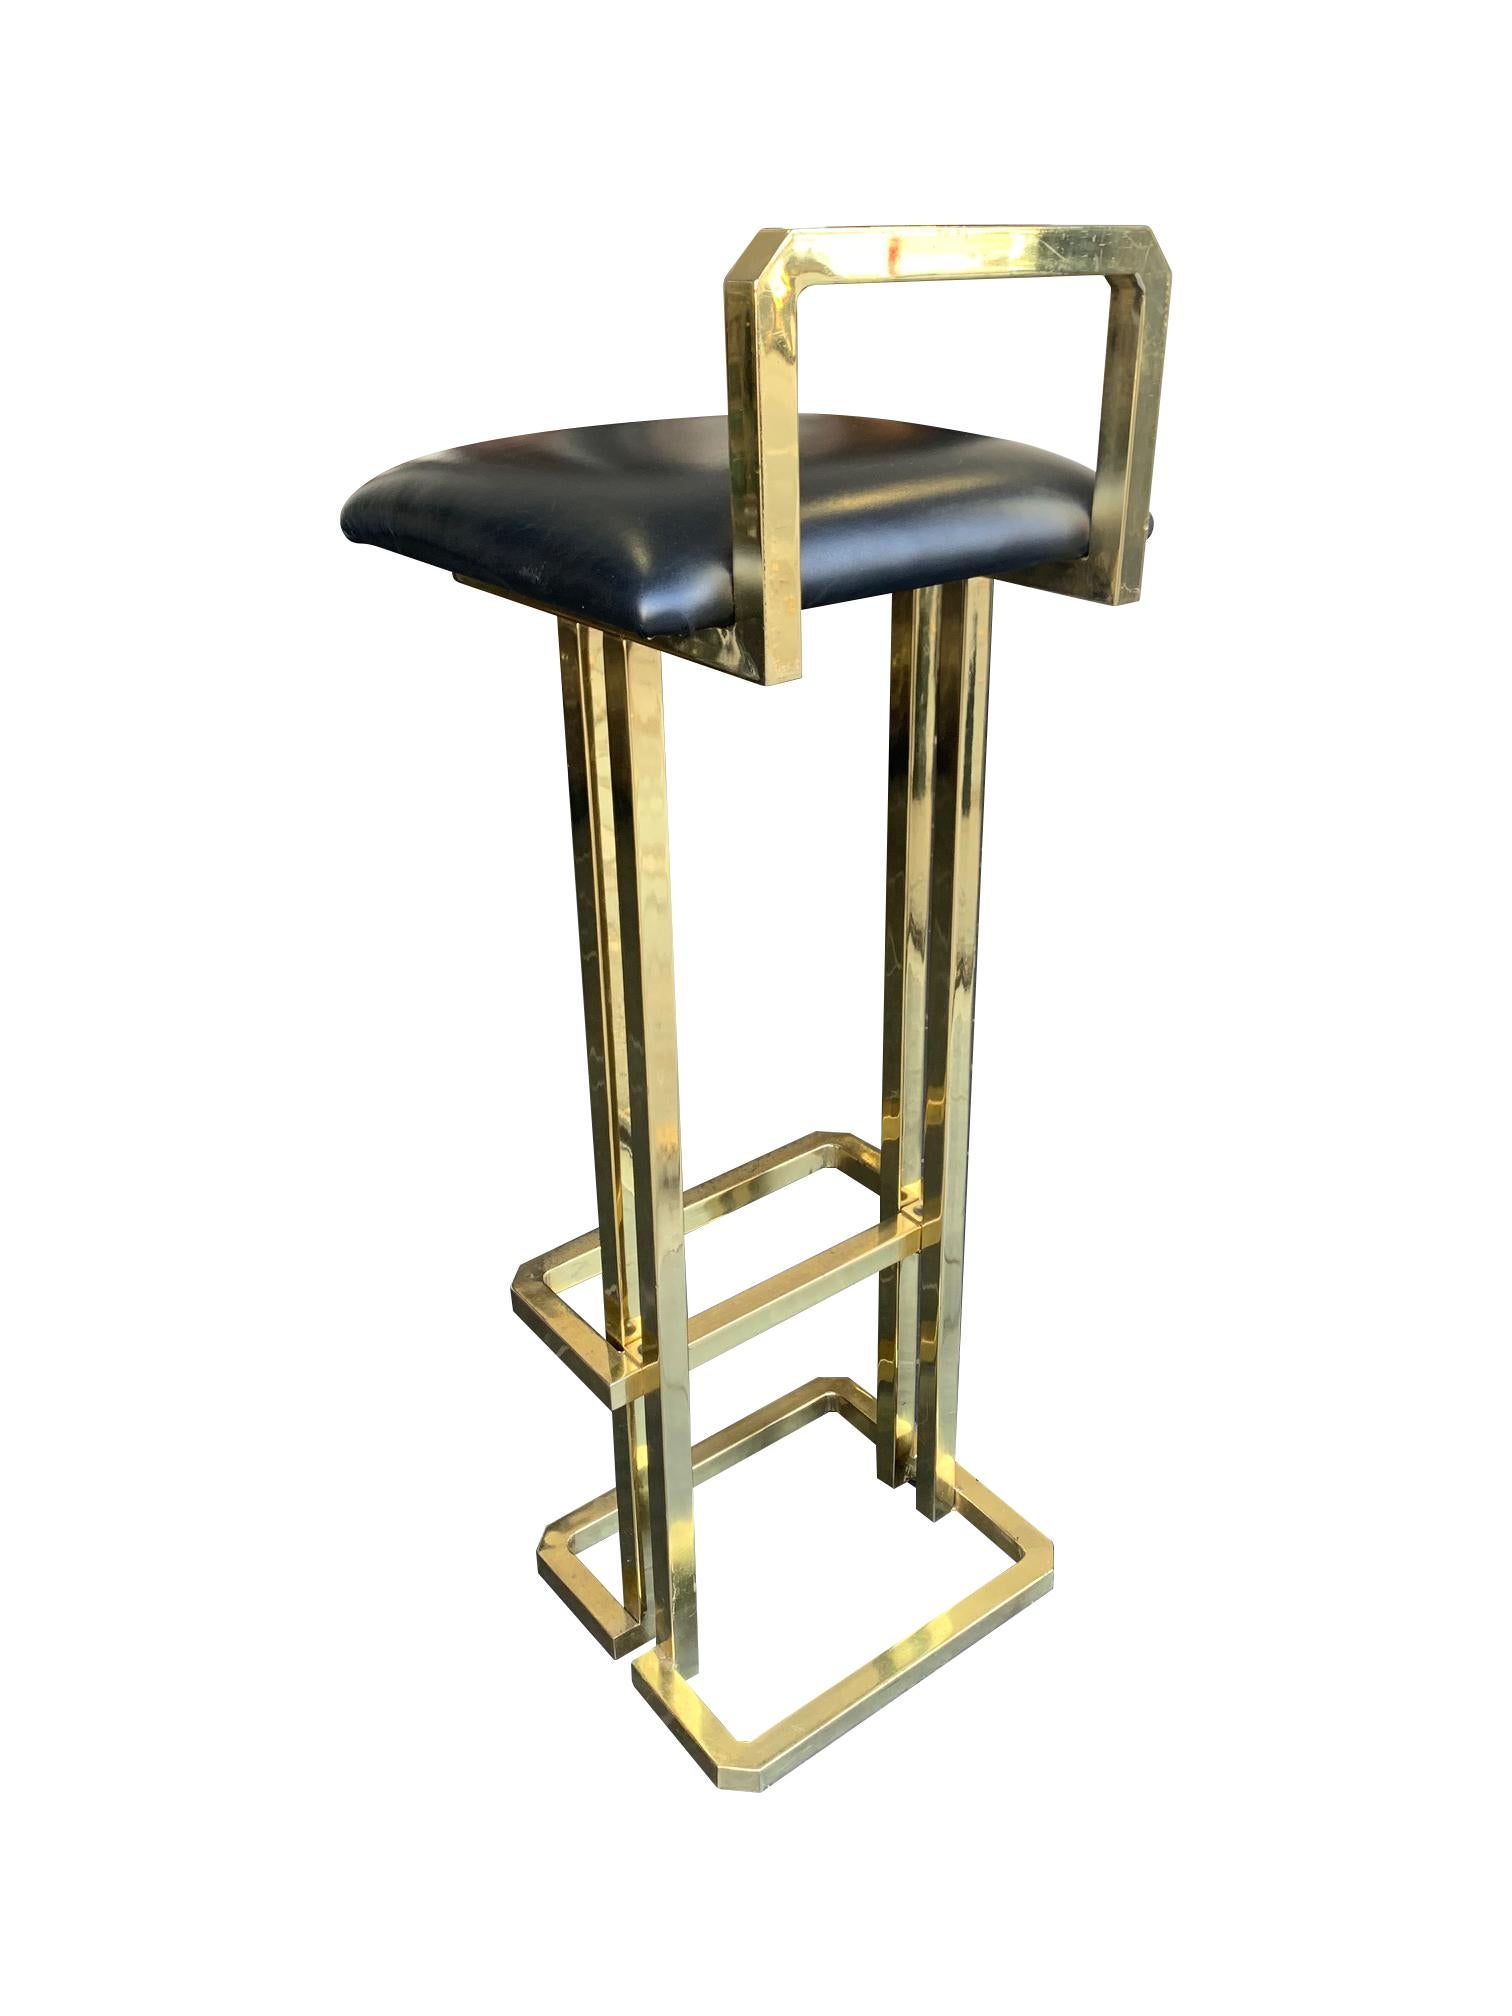 Set of 3 Maison Jansen Style Gilt Metal Stools with Black Leather Seat Pads For Sale 1